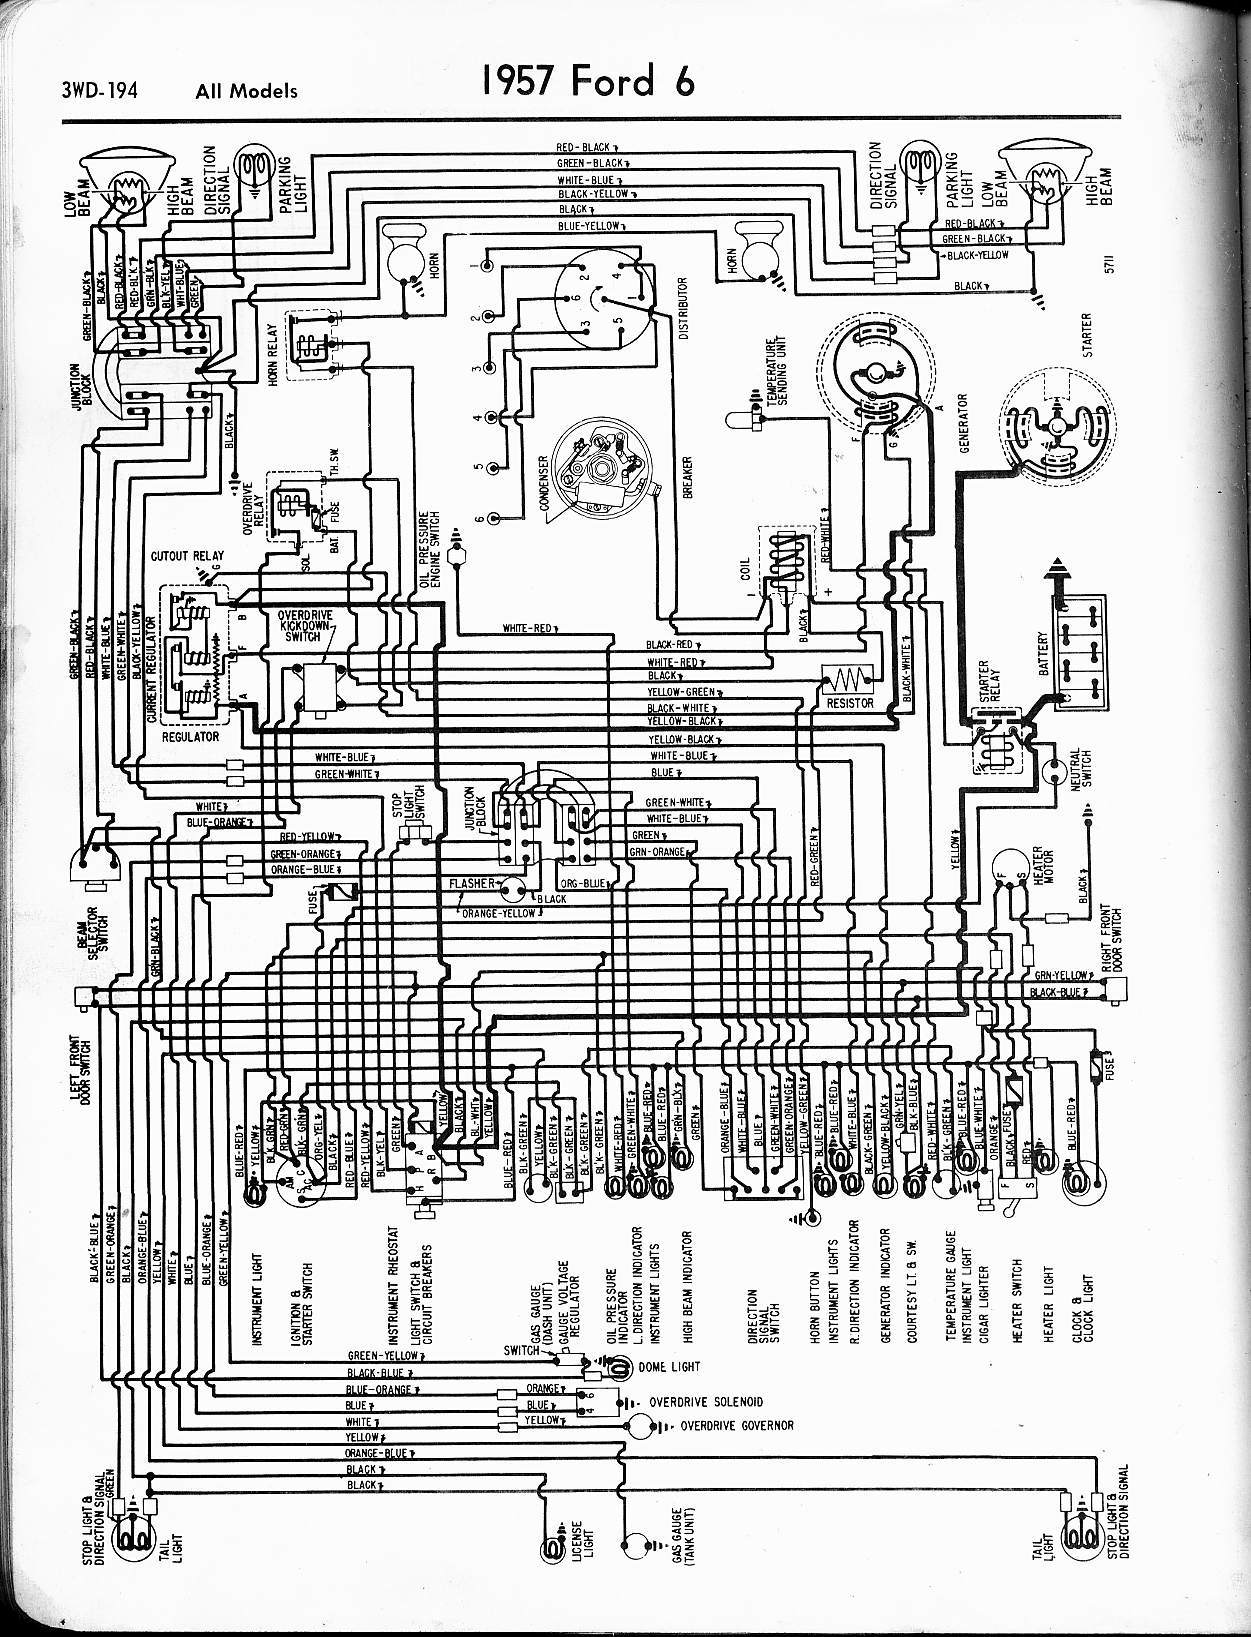 1957 Ford Truck Wiring Diagram